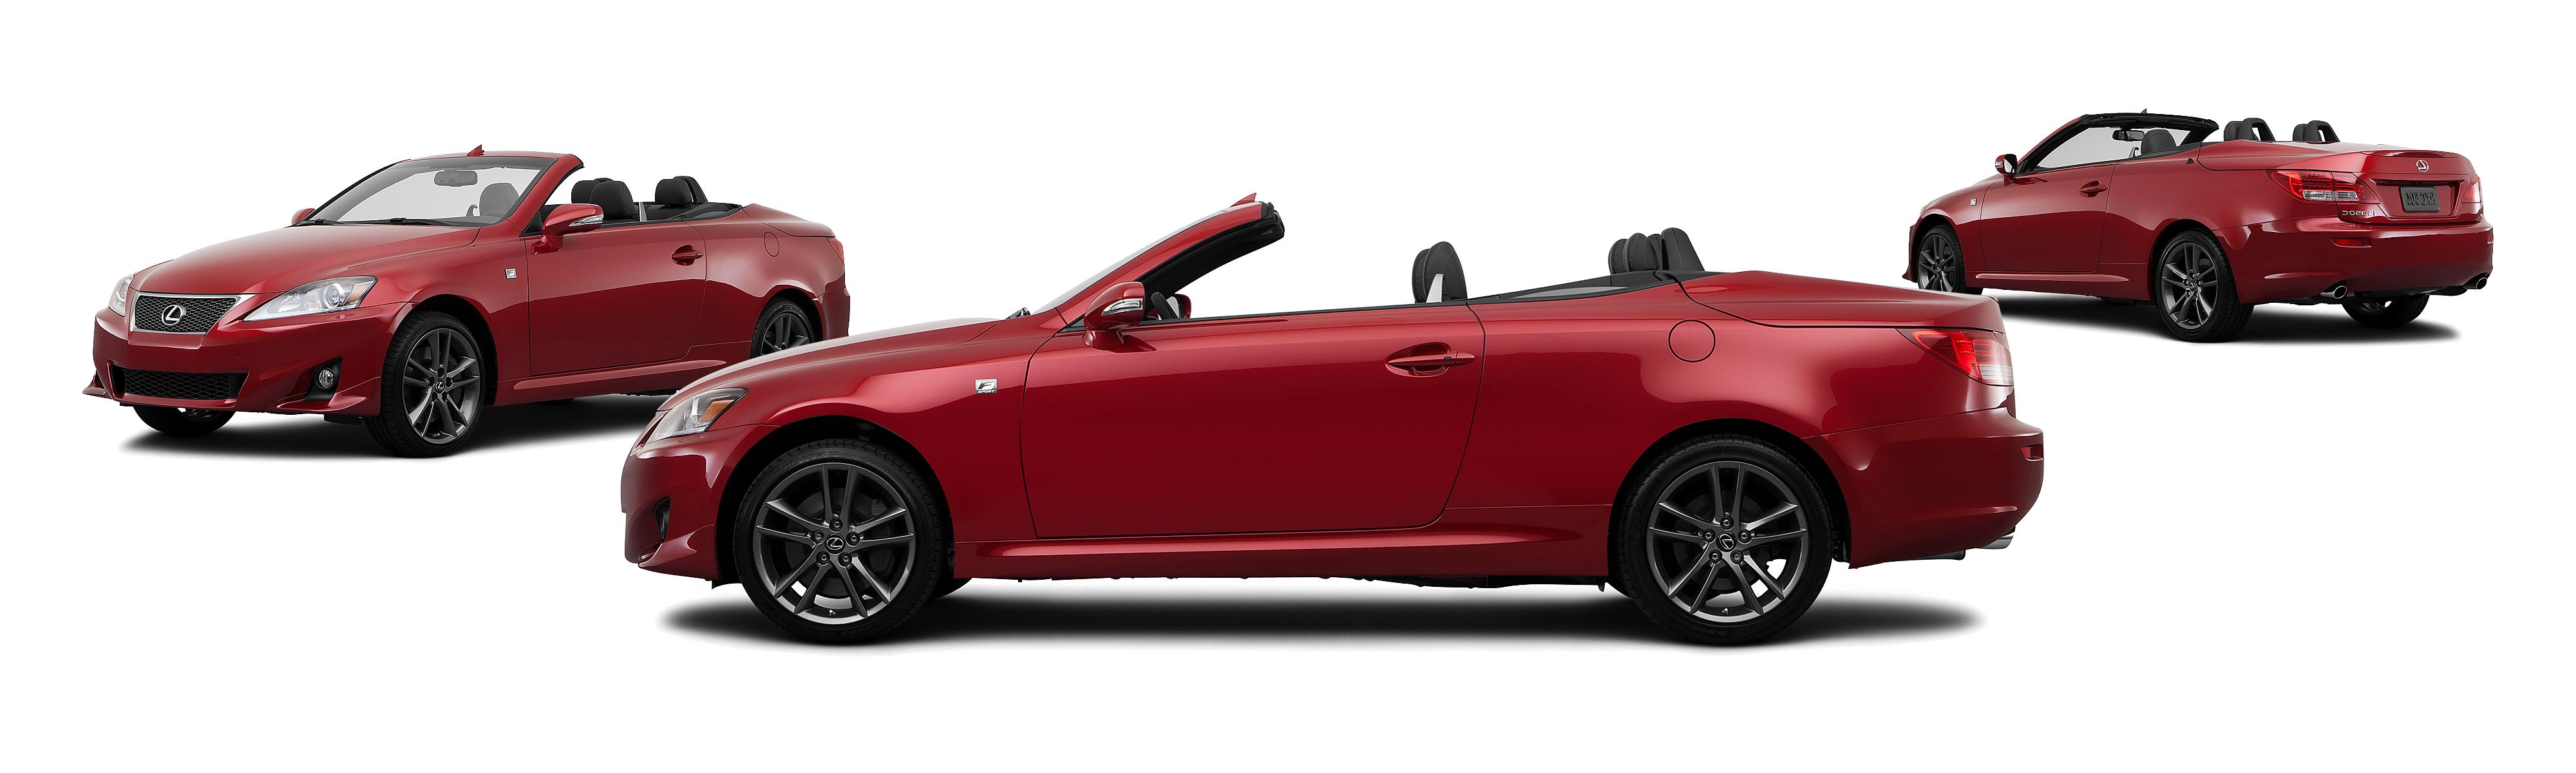 2013 Lexus IS 350C 2dr Convertible - Research - GrooveCar